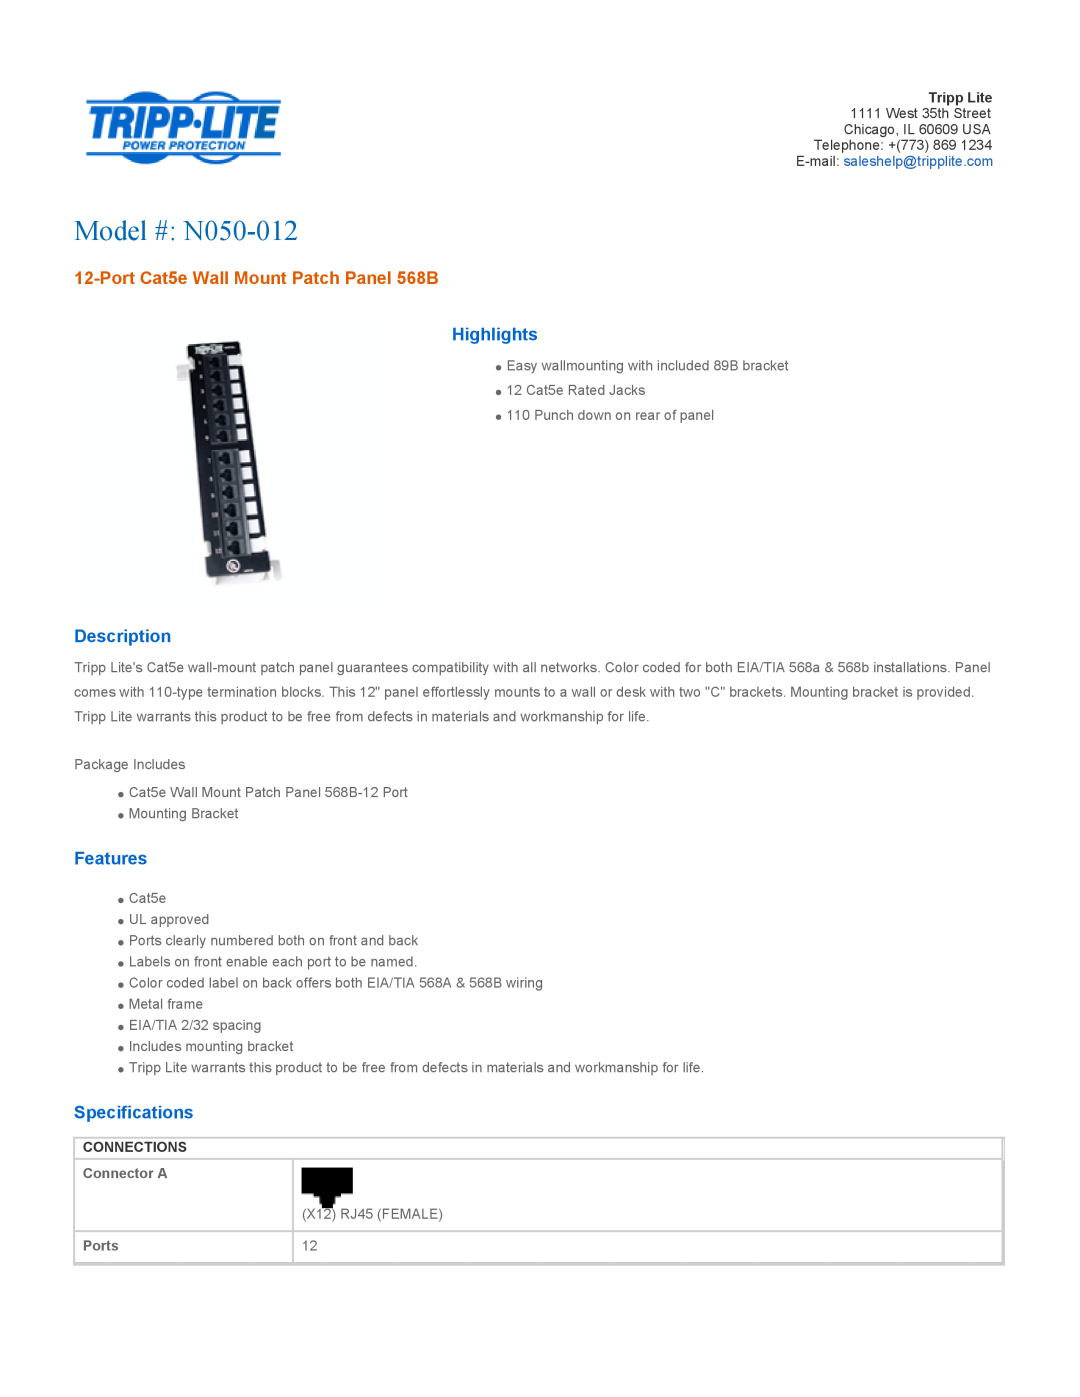 Tripp Lite specifications Highlights, Description, Features, Specifications, Connections, Model # N050-012, Connector A 